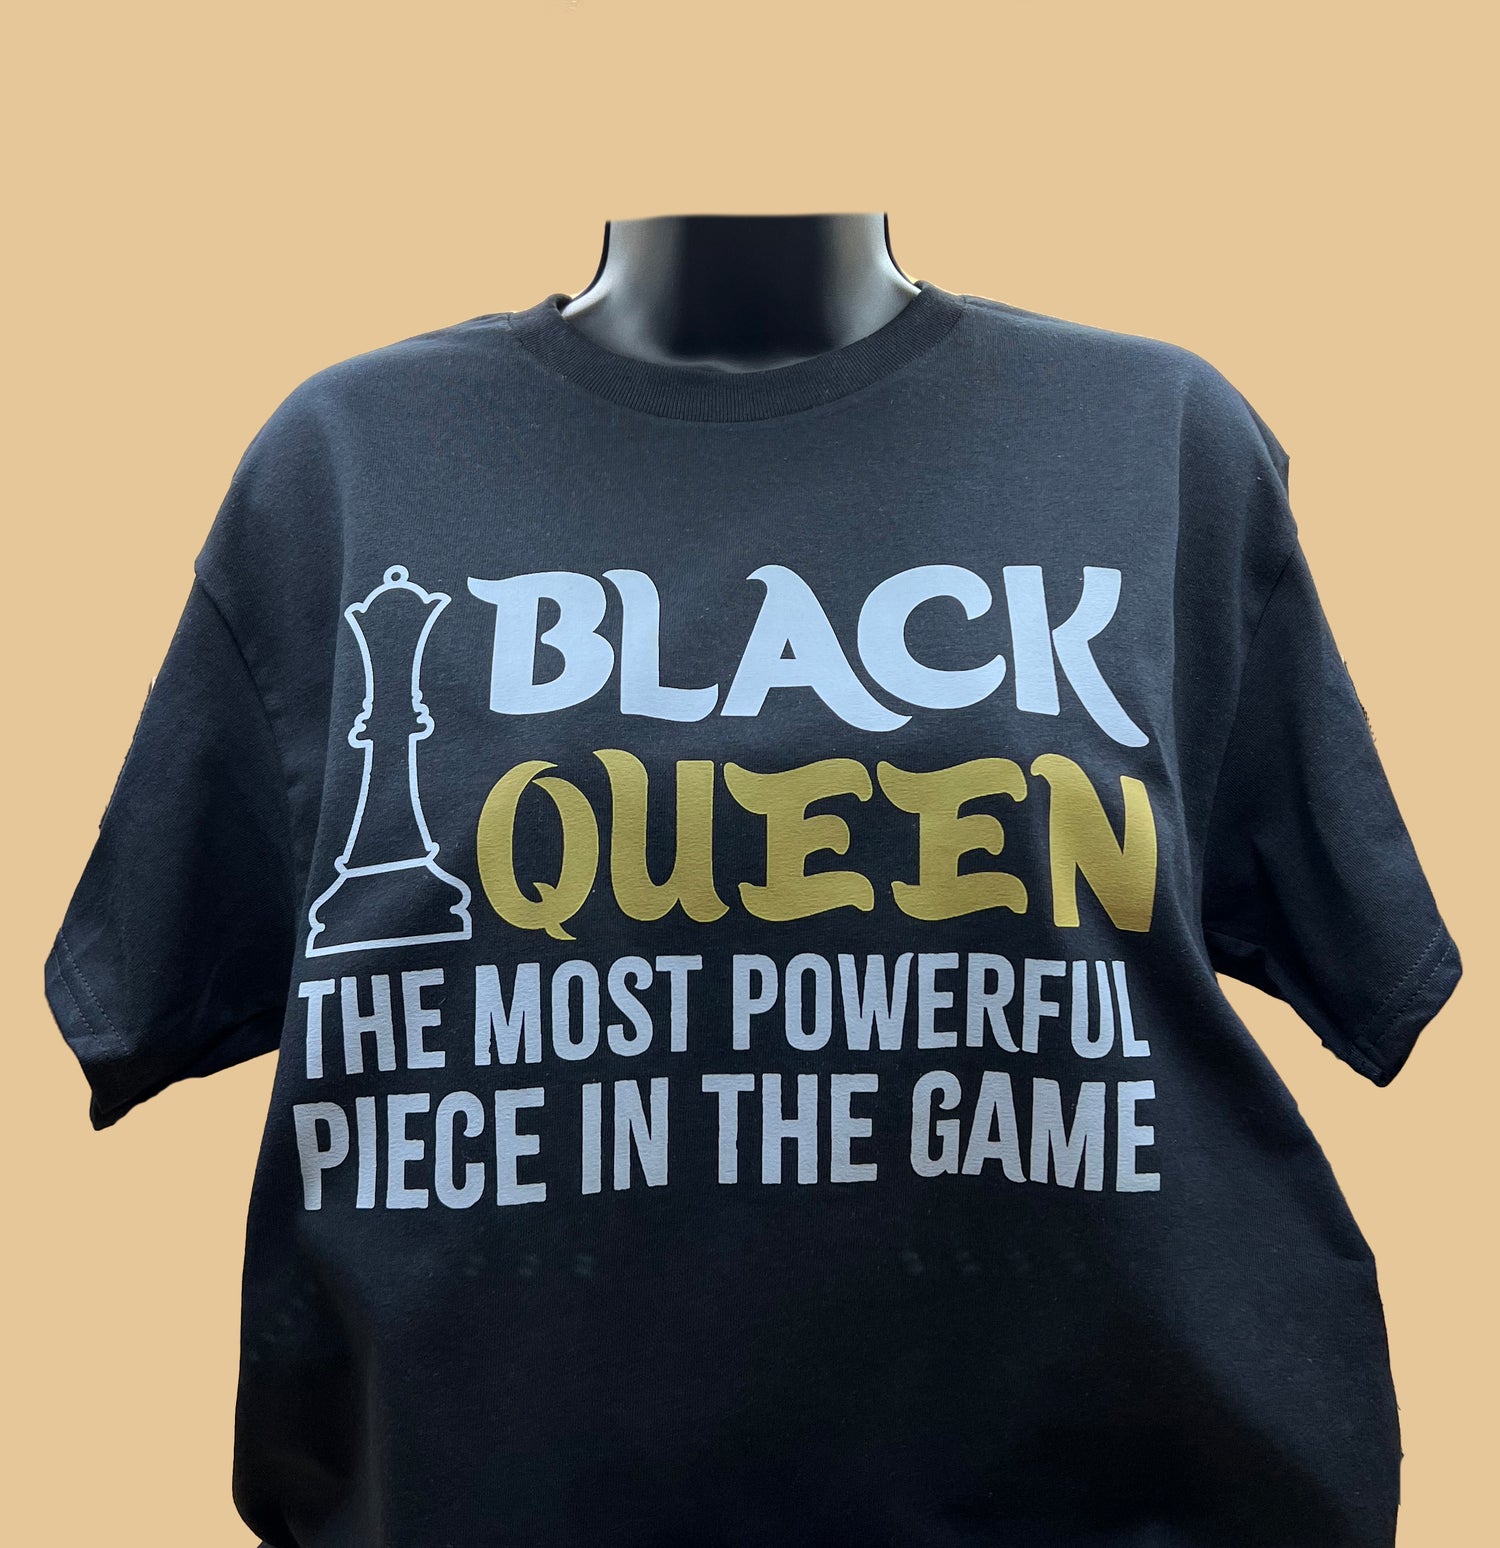 T-Shirts with Black History Designs